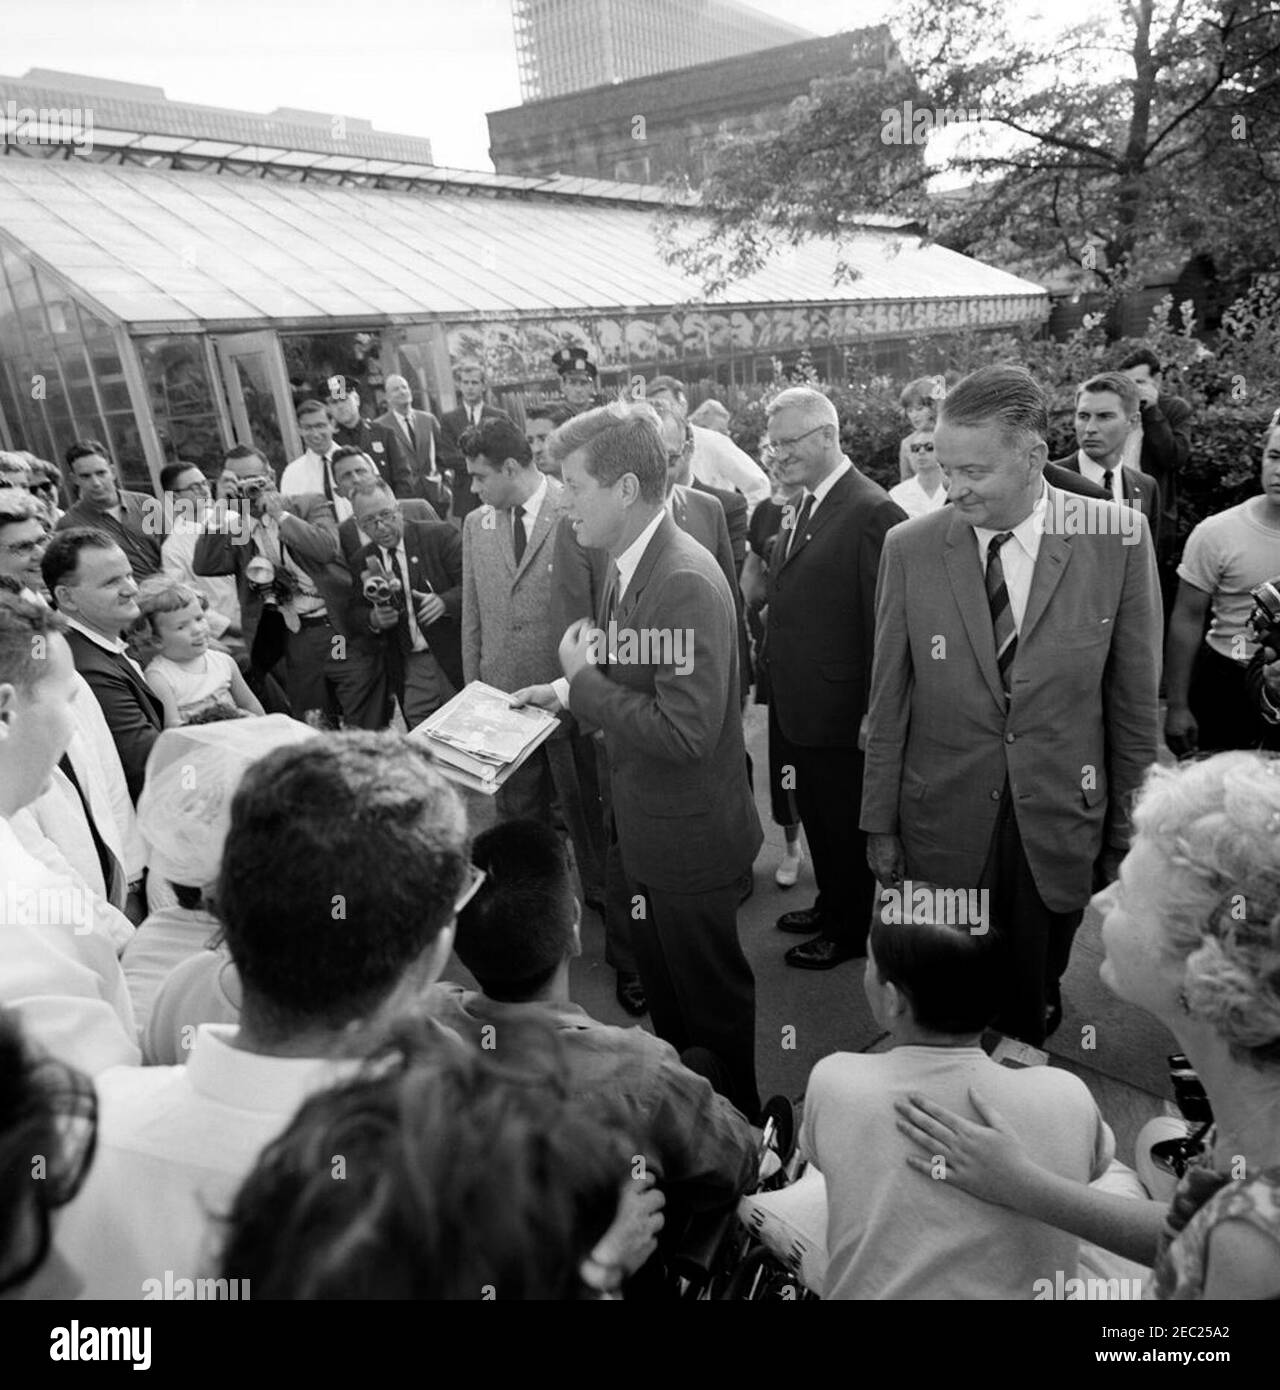 Trip to New York and Connecticut: New York City, President John F. Kennedy Visits with Patients at the Institute of Physical Medicine and Rehabilitation, New York University Medical Center, 5:45PM. President John F. Kennedy greets patients after visiting his father, Ambassador Joseph P. Kennedy, Sr., at the Institute of Physical Medicine and Rehabilitation at New York University Medical Center. Founder and Director of the Institute, Dr. Howard A. Rusk, stands right of President Kennedy; White House Secret Service agent, Toby Chandler, stands at right in background. New York City, New York. [Ph Stock Photo